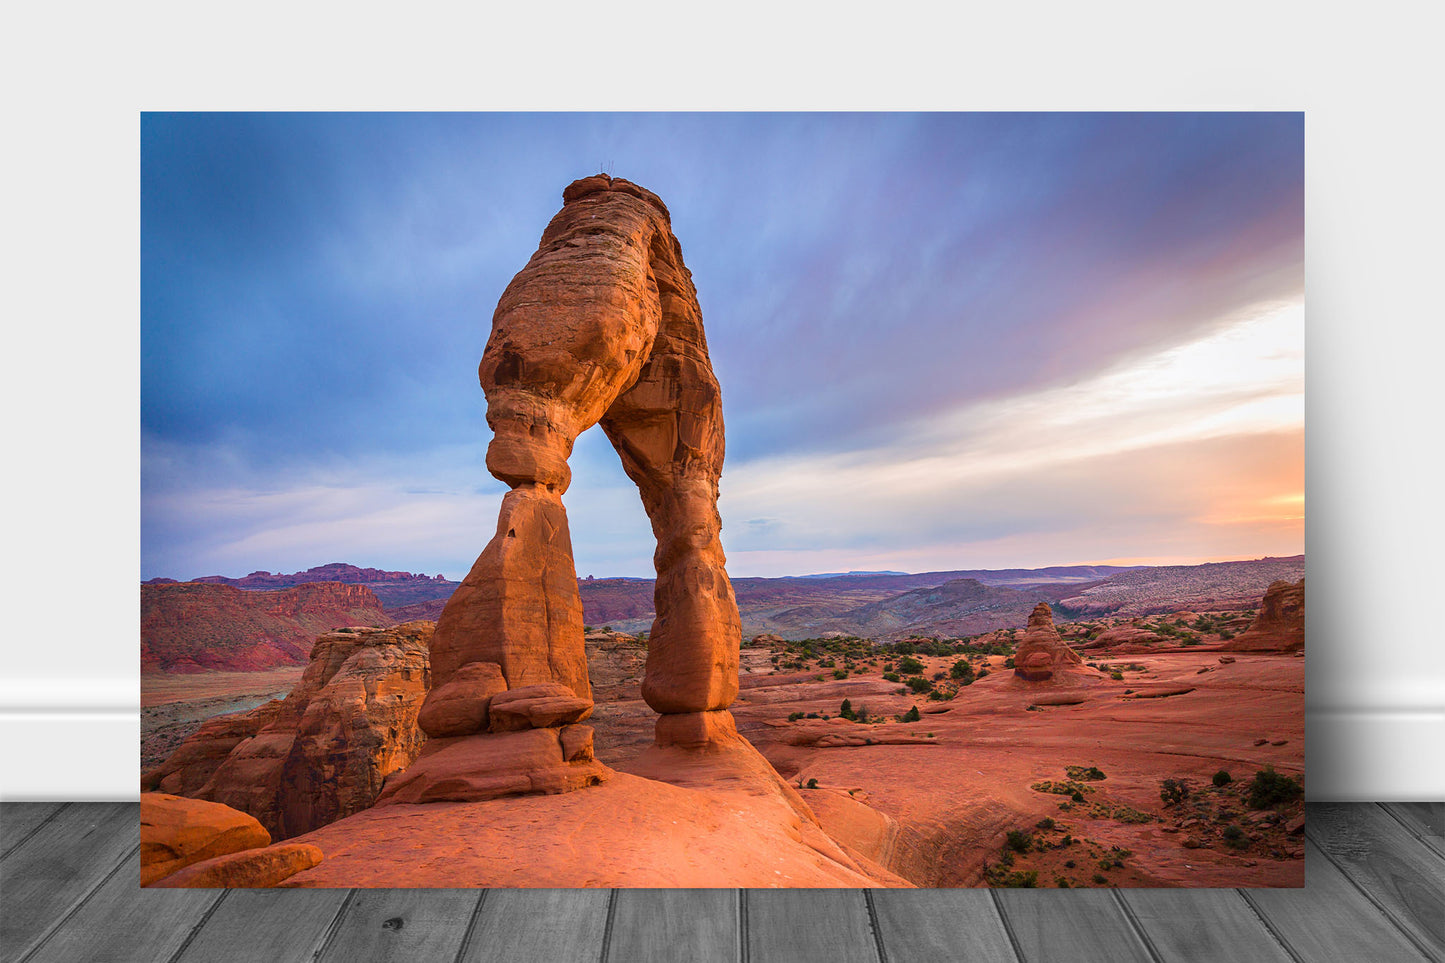 Western landscape metal print of Delicate Arch glowing in evening sunlight at sunset in Arches National Park near Moab, Utah by Sean Ramsey of Southern Plains Photography.